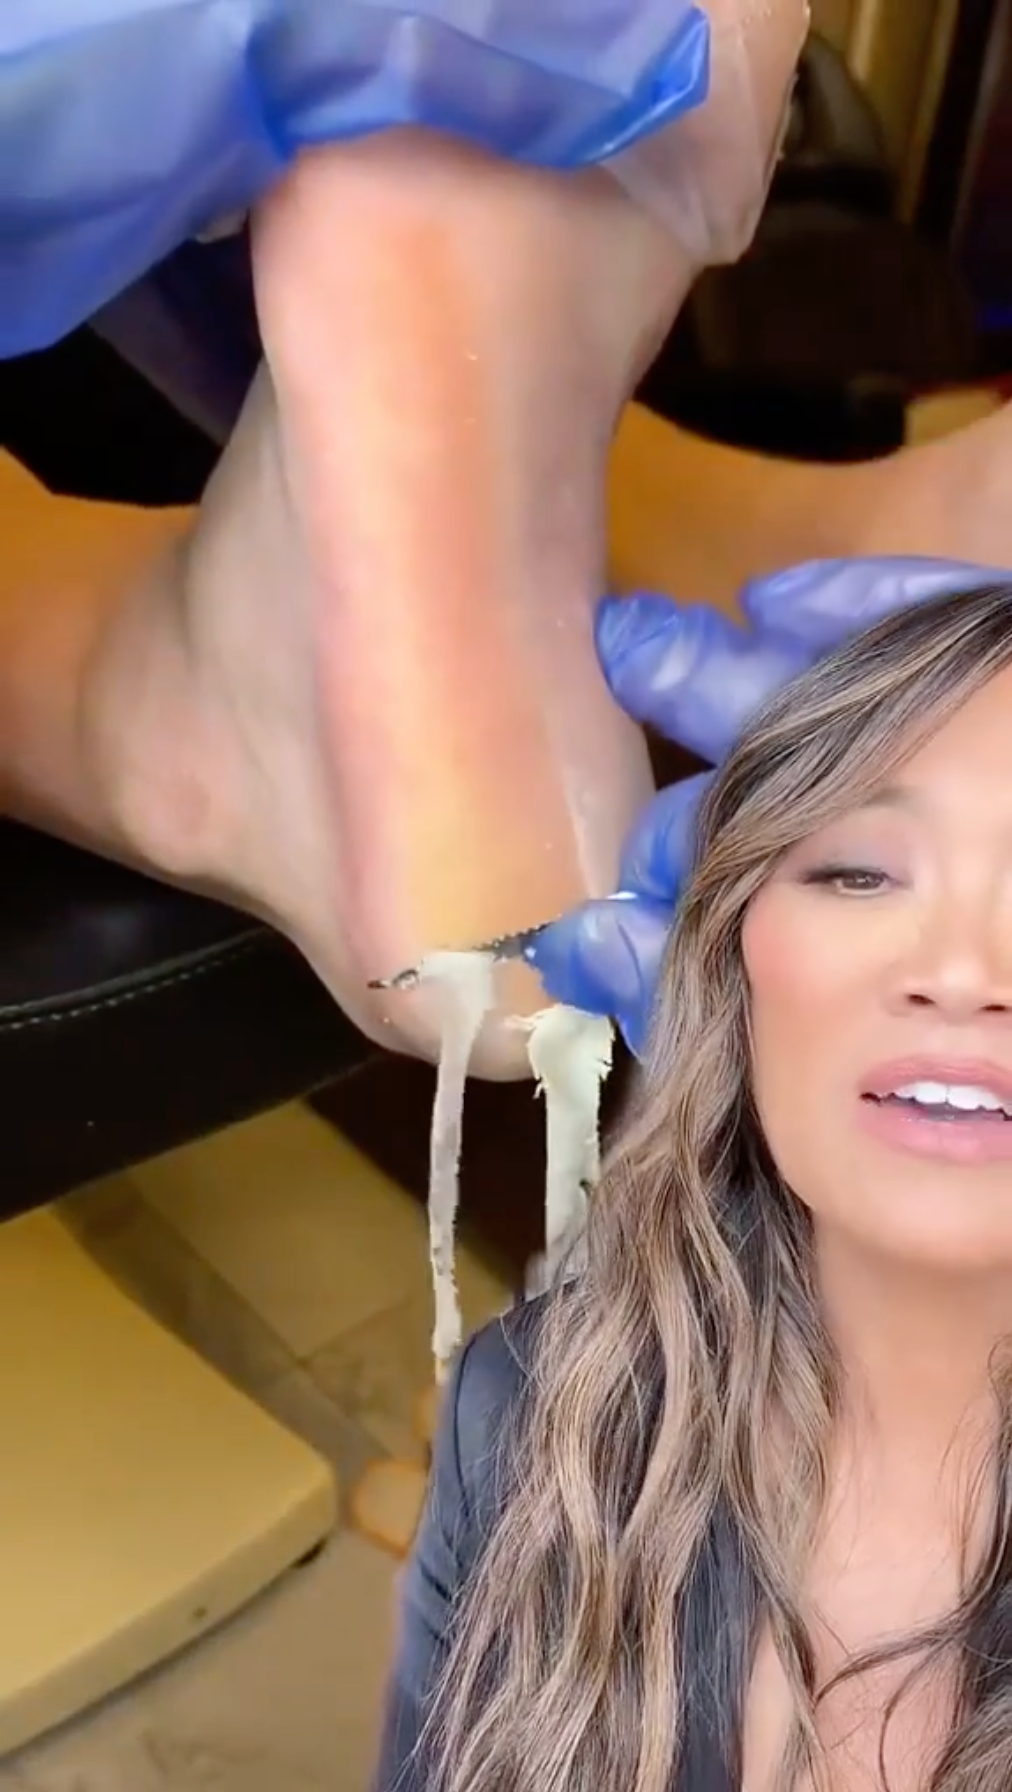 Dr Pimple Popper — See 'Parmesan Cheese' Noodles Being Scraped Off Feet